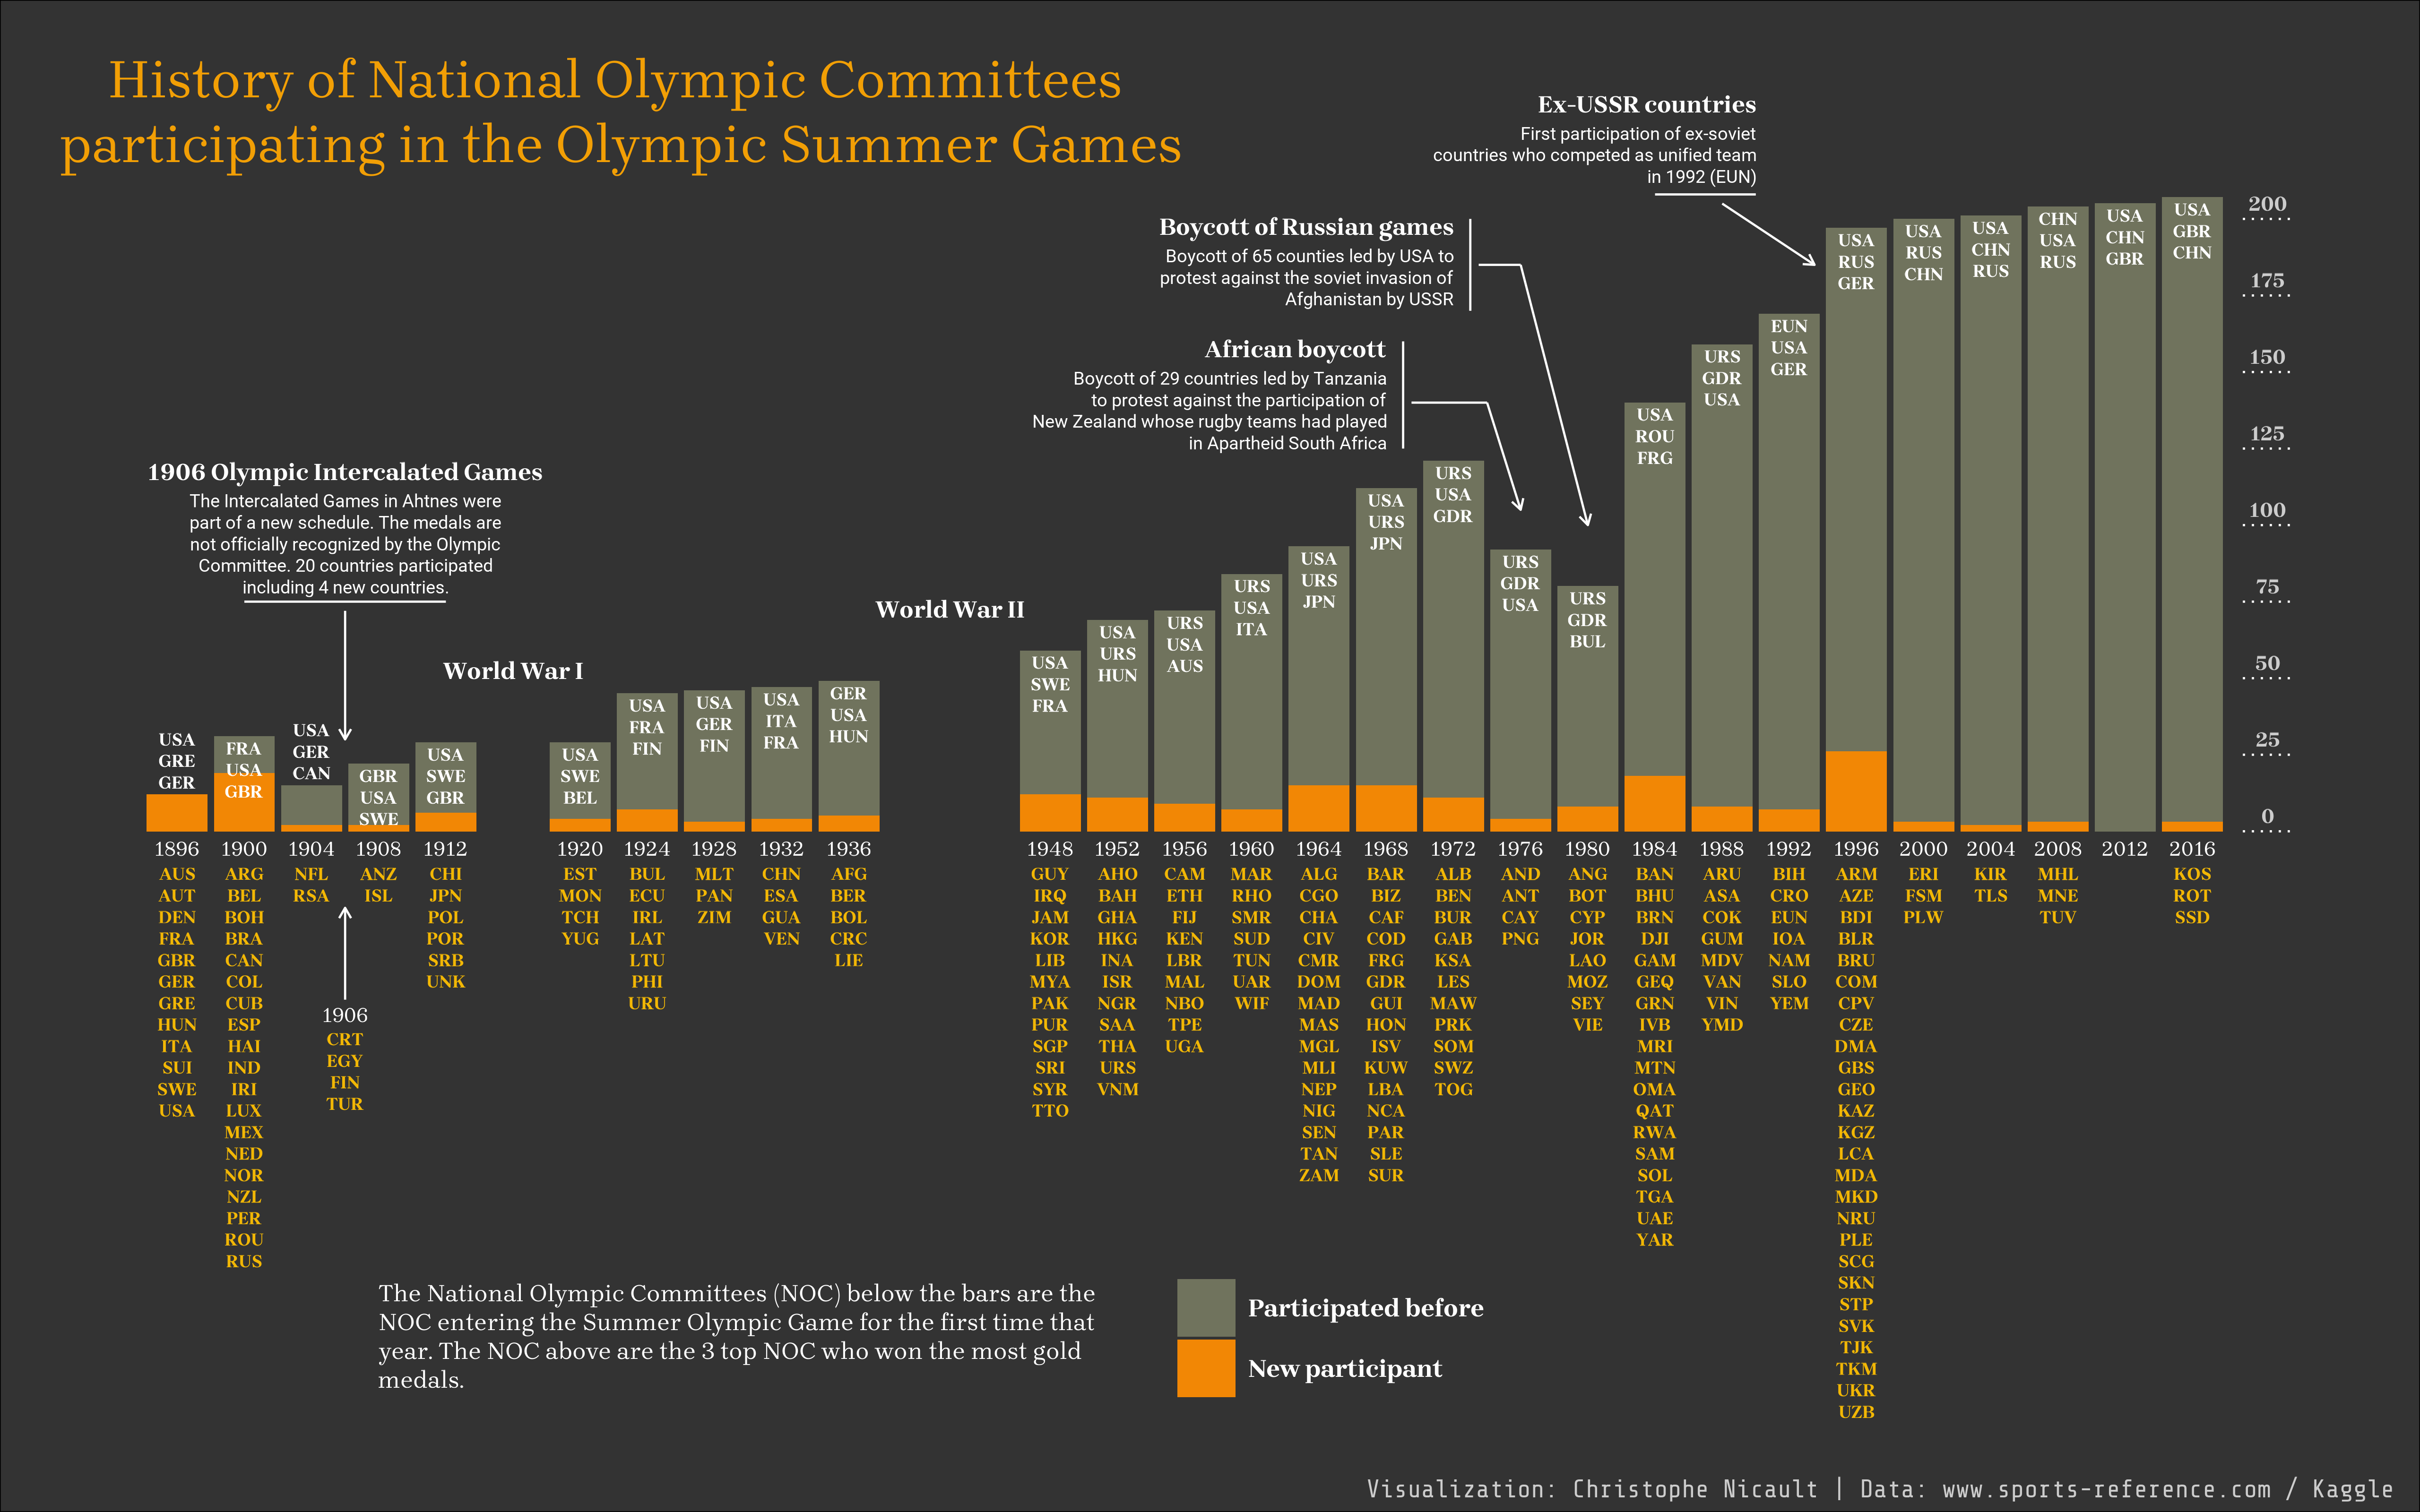 History of National Olympic Committees participating in the Olympic Summer Games